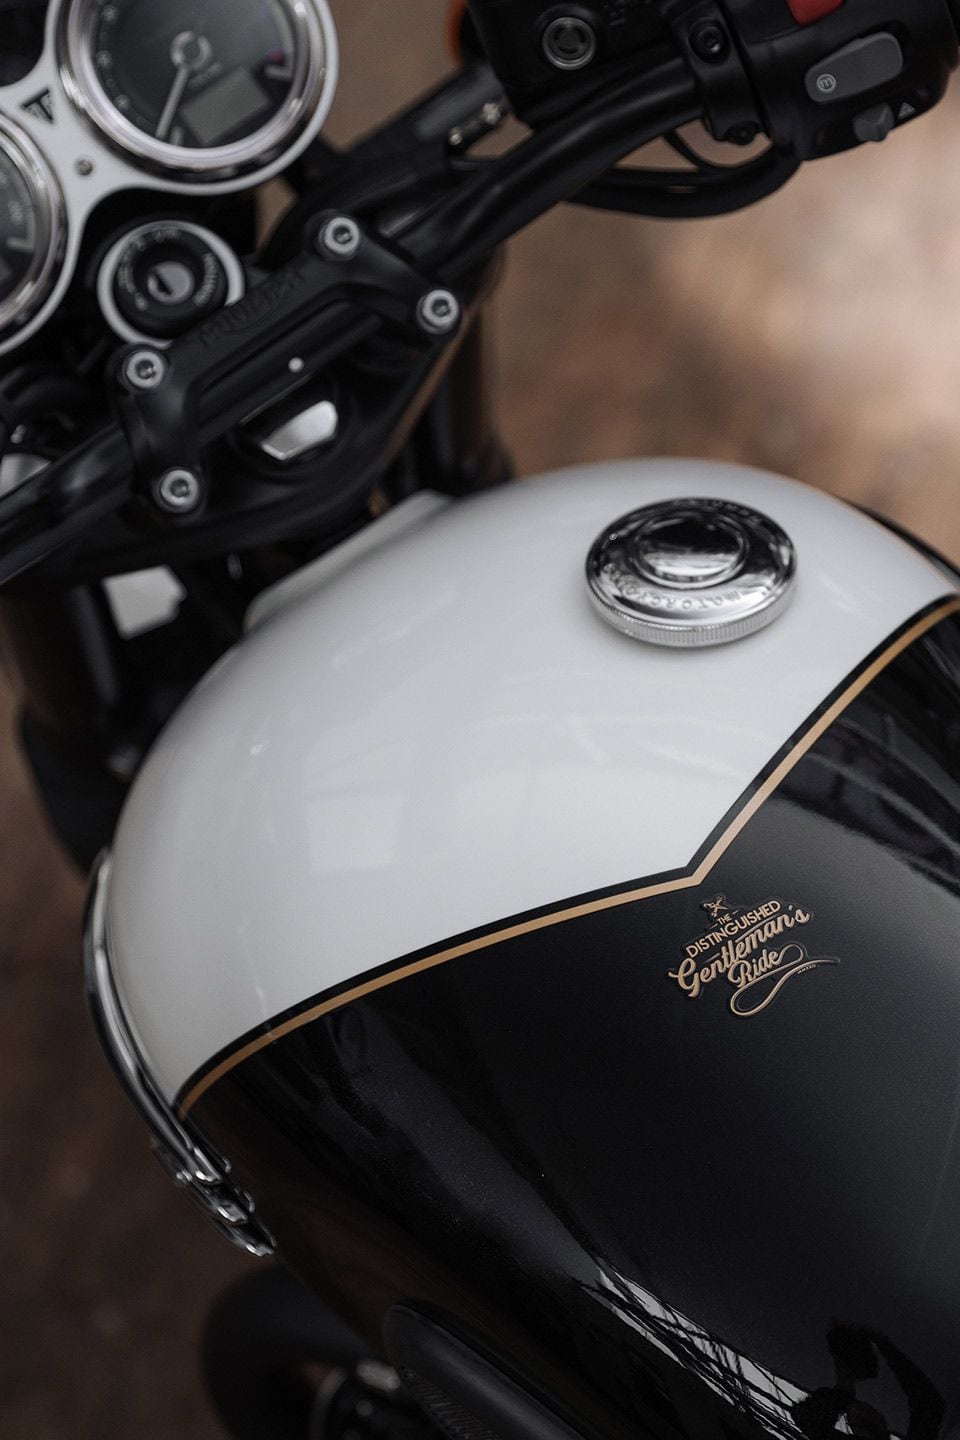 The 2023 DGR logo and hand-painted pinstripes shown on the two-tone tank.